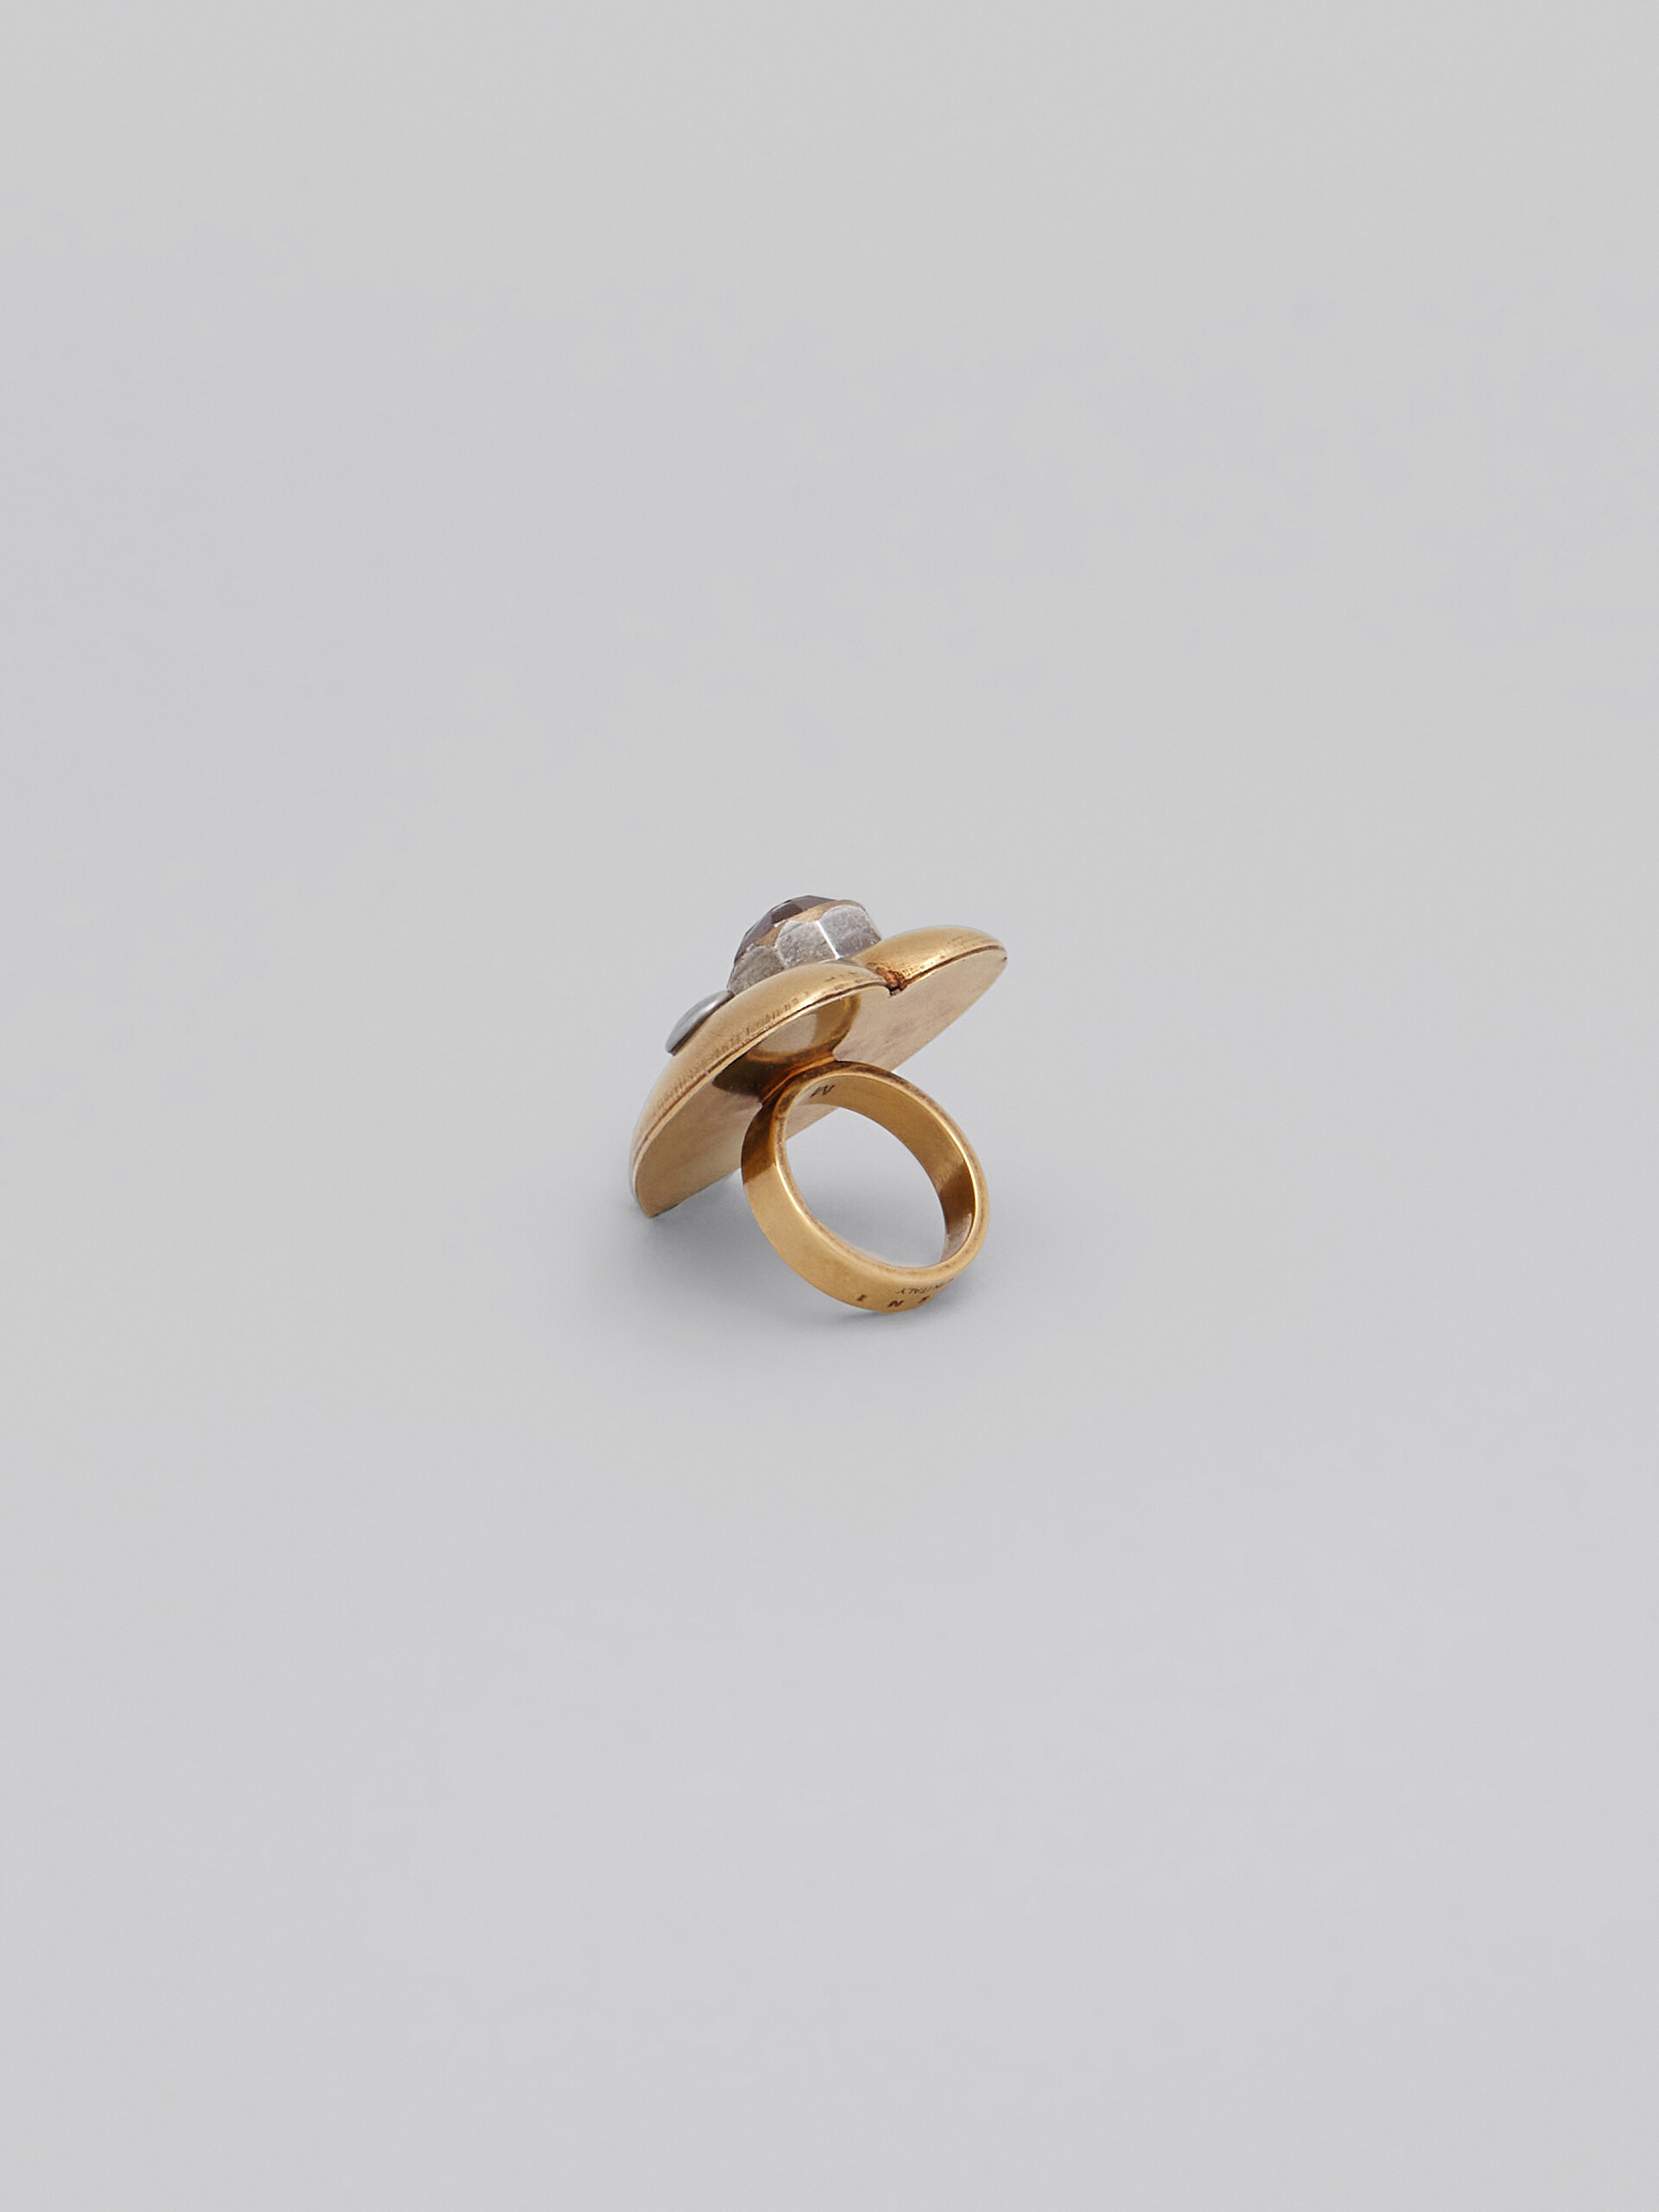 Raw Hearts gold ring with brown stone - Rings - Image 3